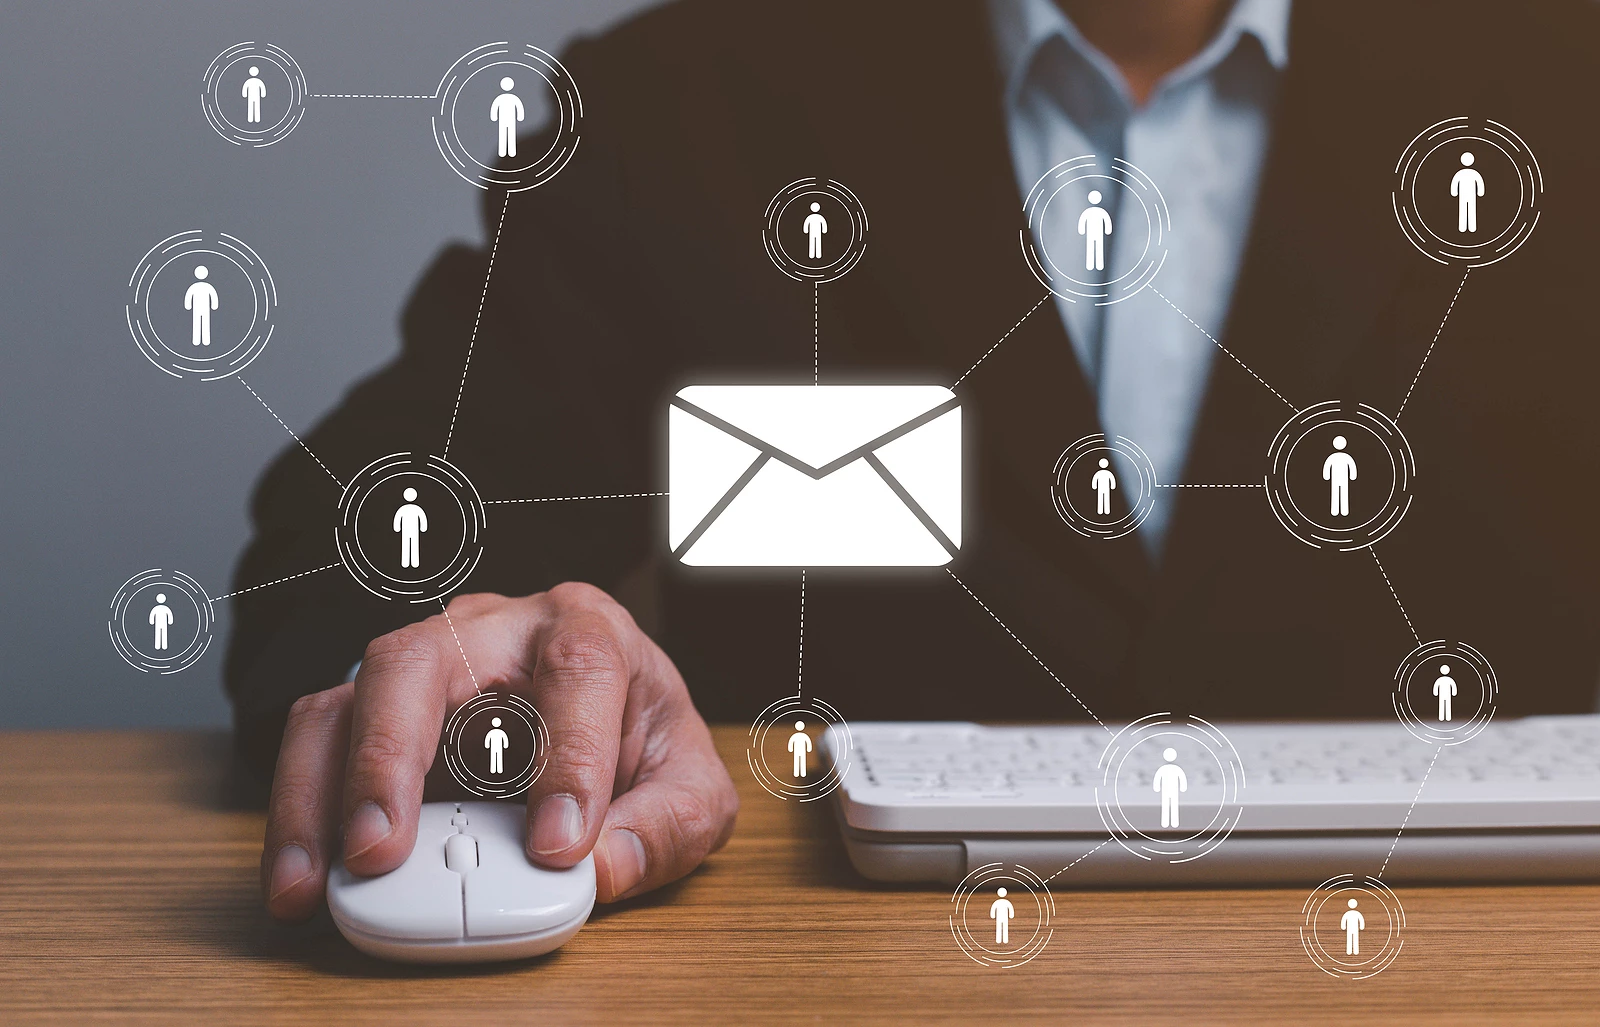 Connecting people through direct marketing